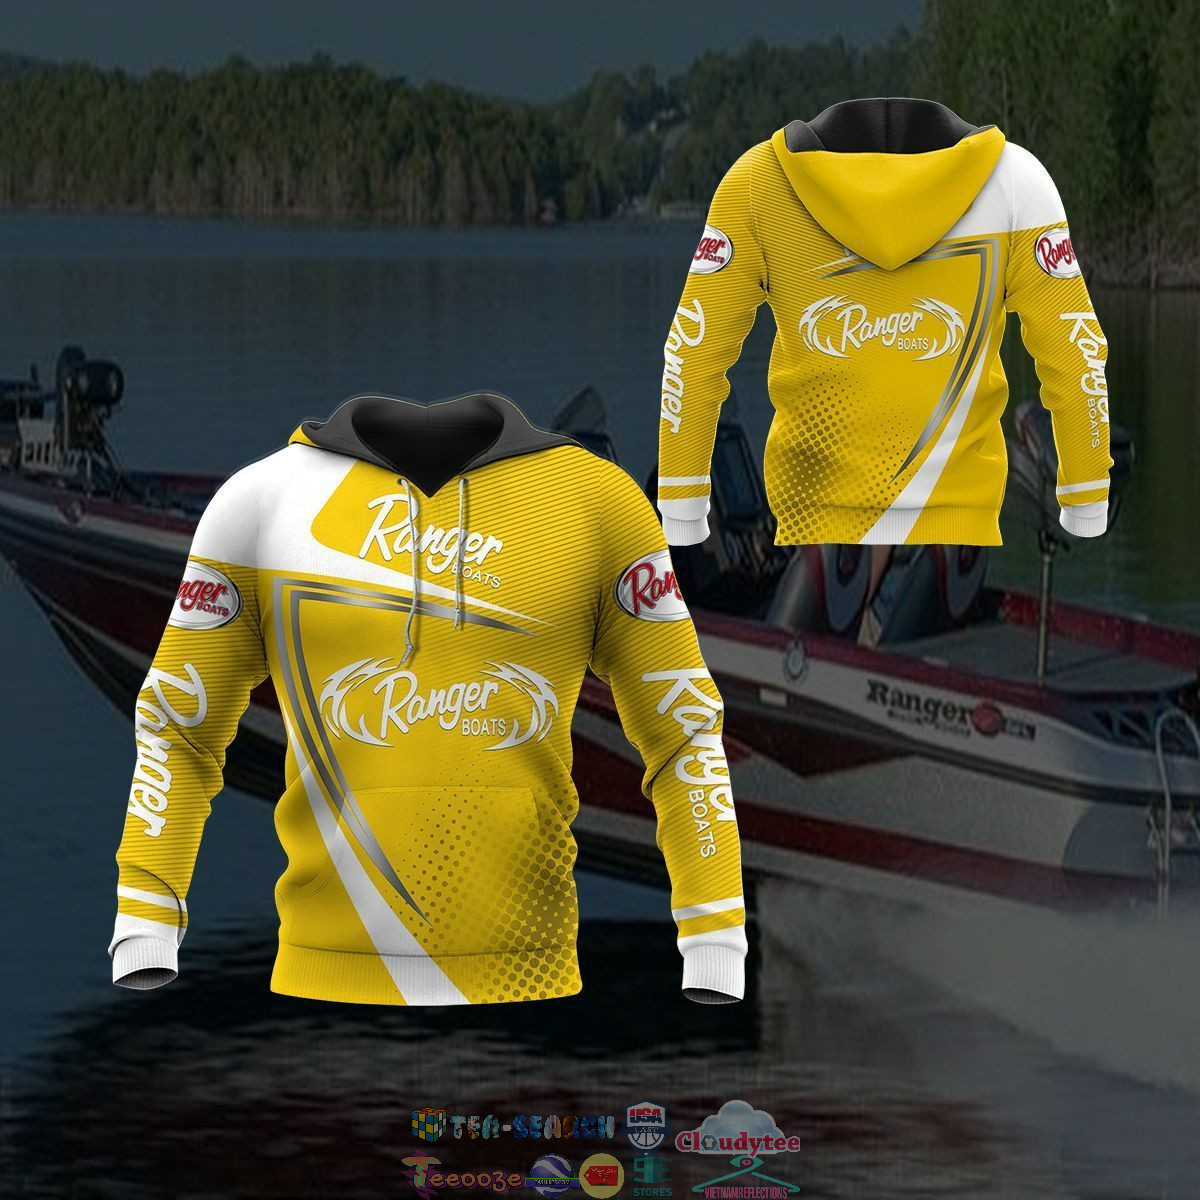 Ranger Boats ver 1 3D hoodie and t-shirt